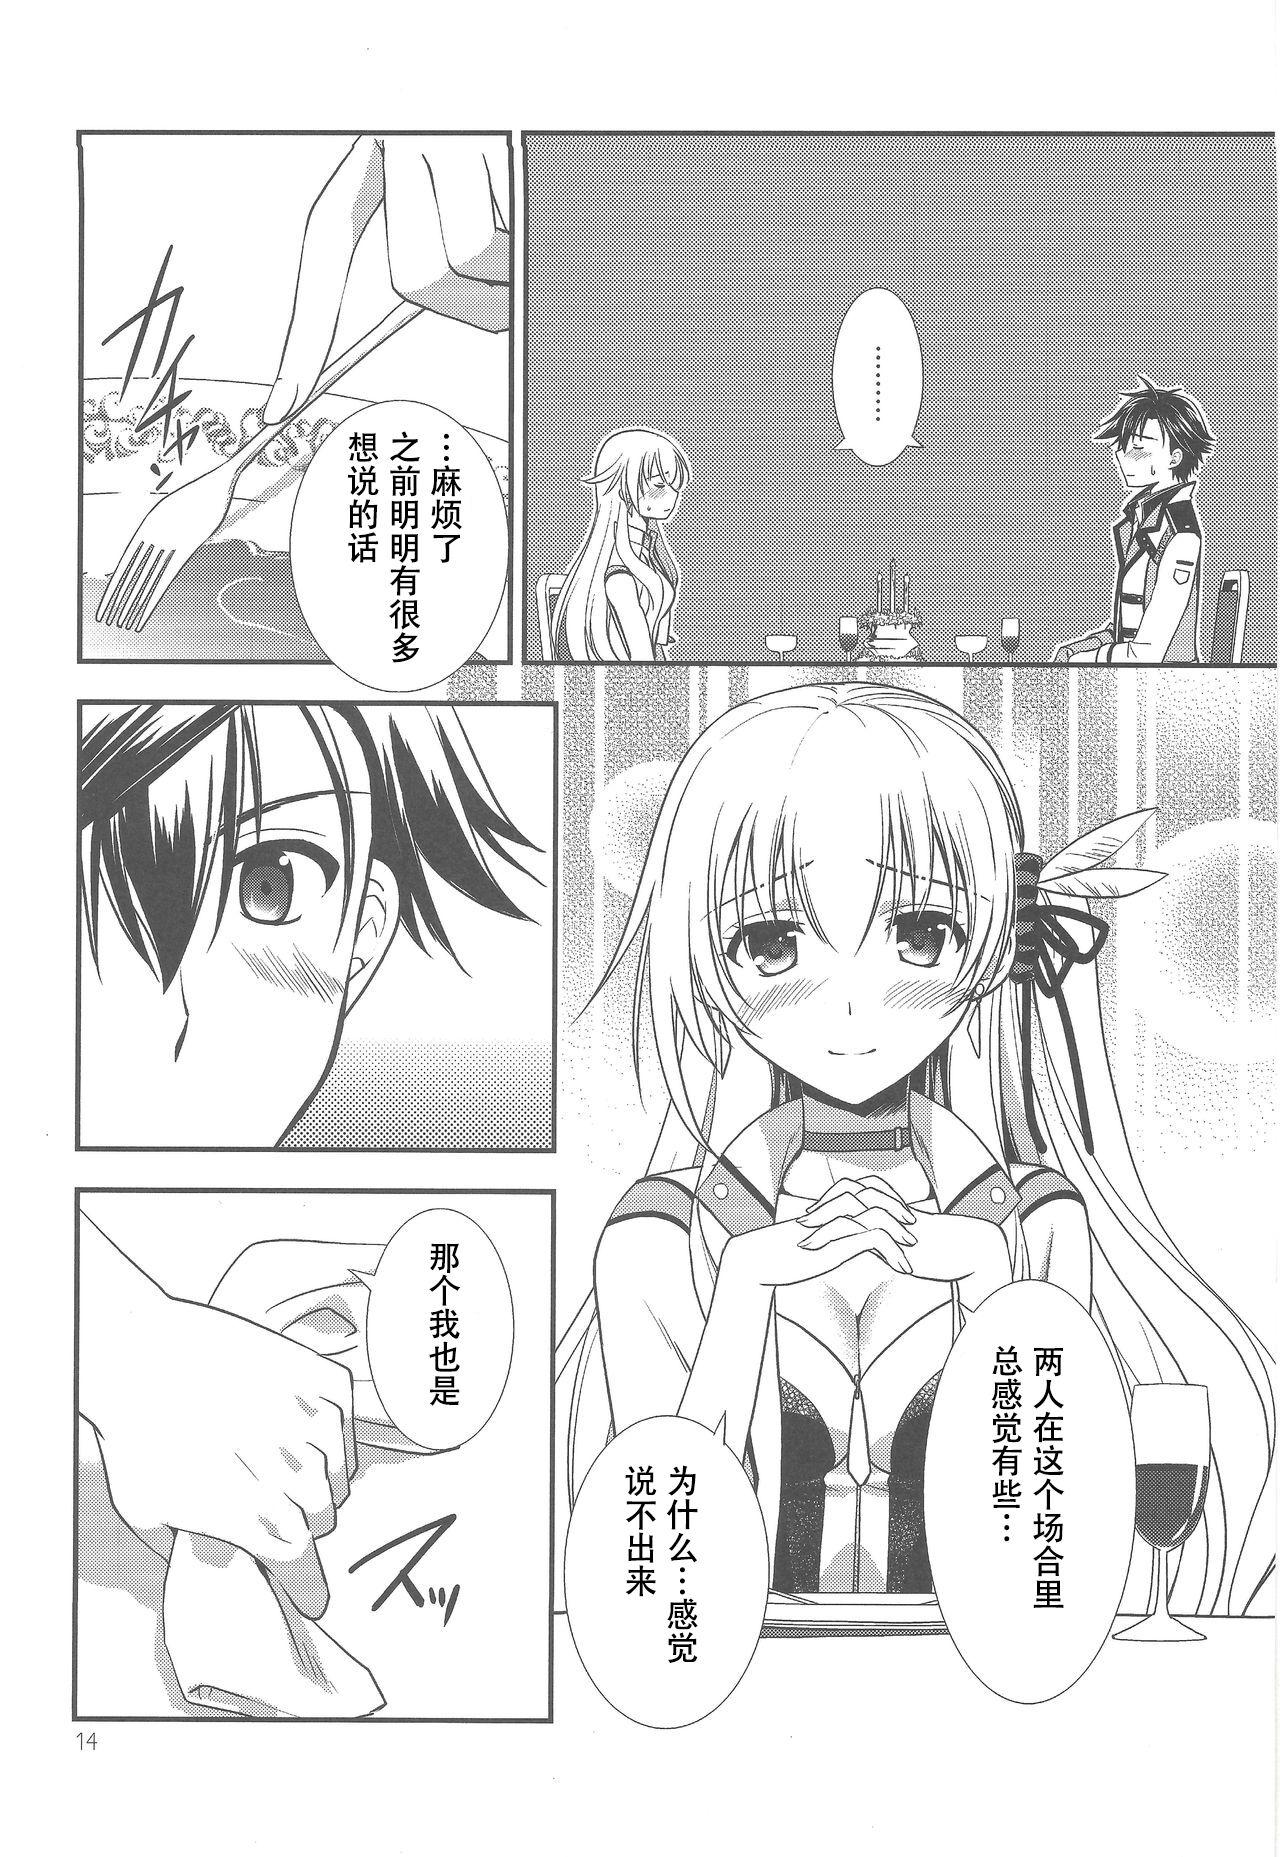 Cheating Wife Houkago Date - The legend of heroes | eiyuu densetsu Blows - Page 12